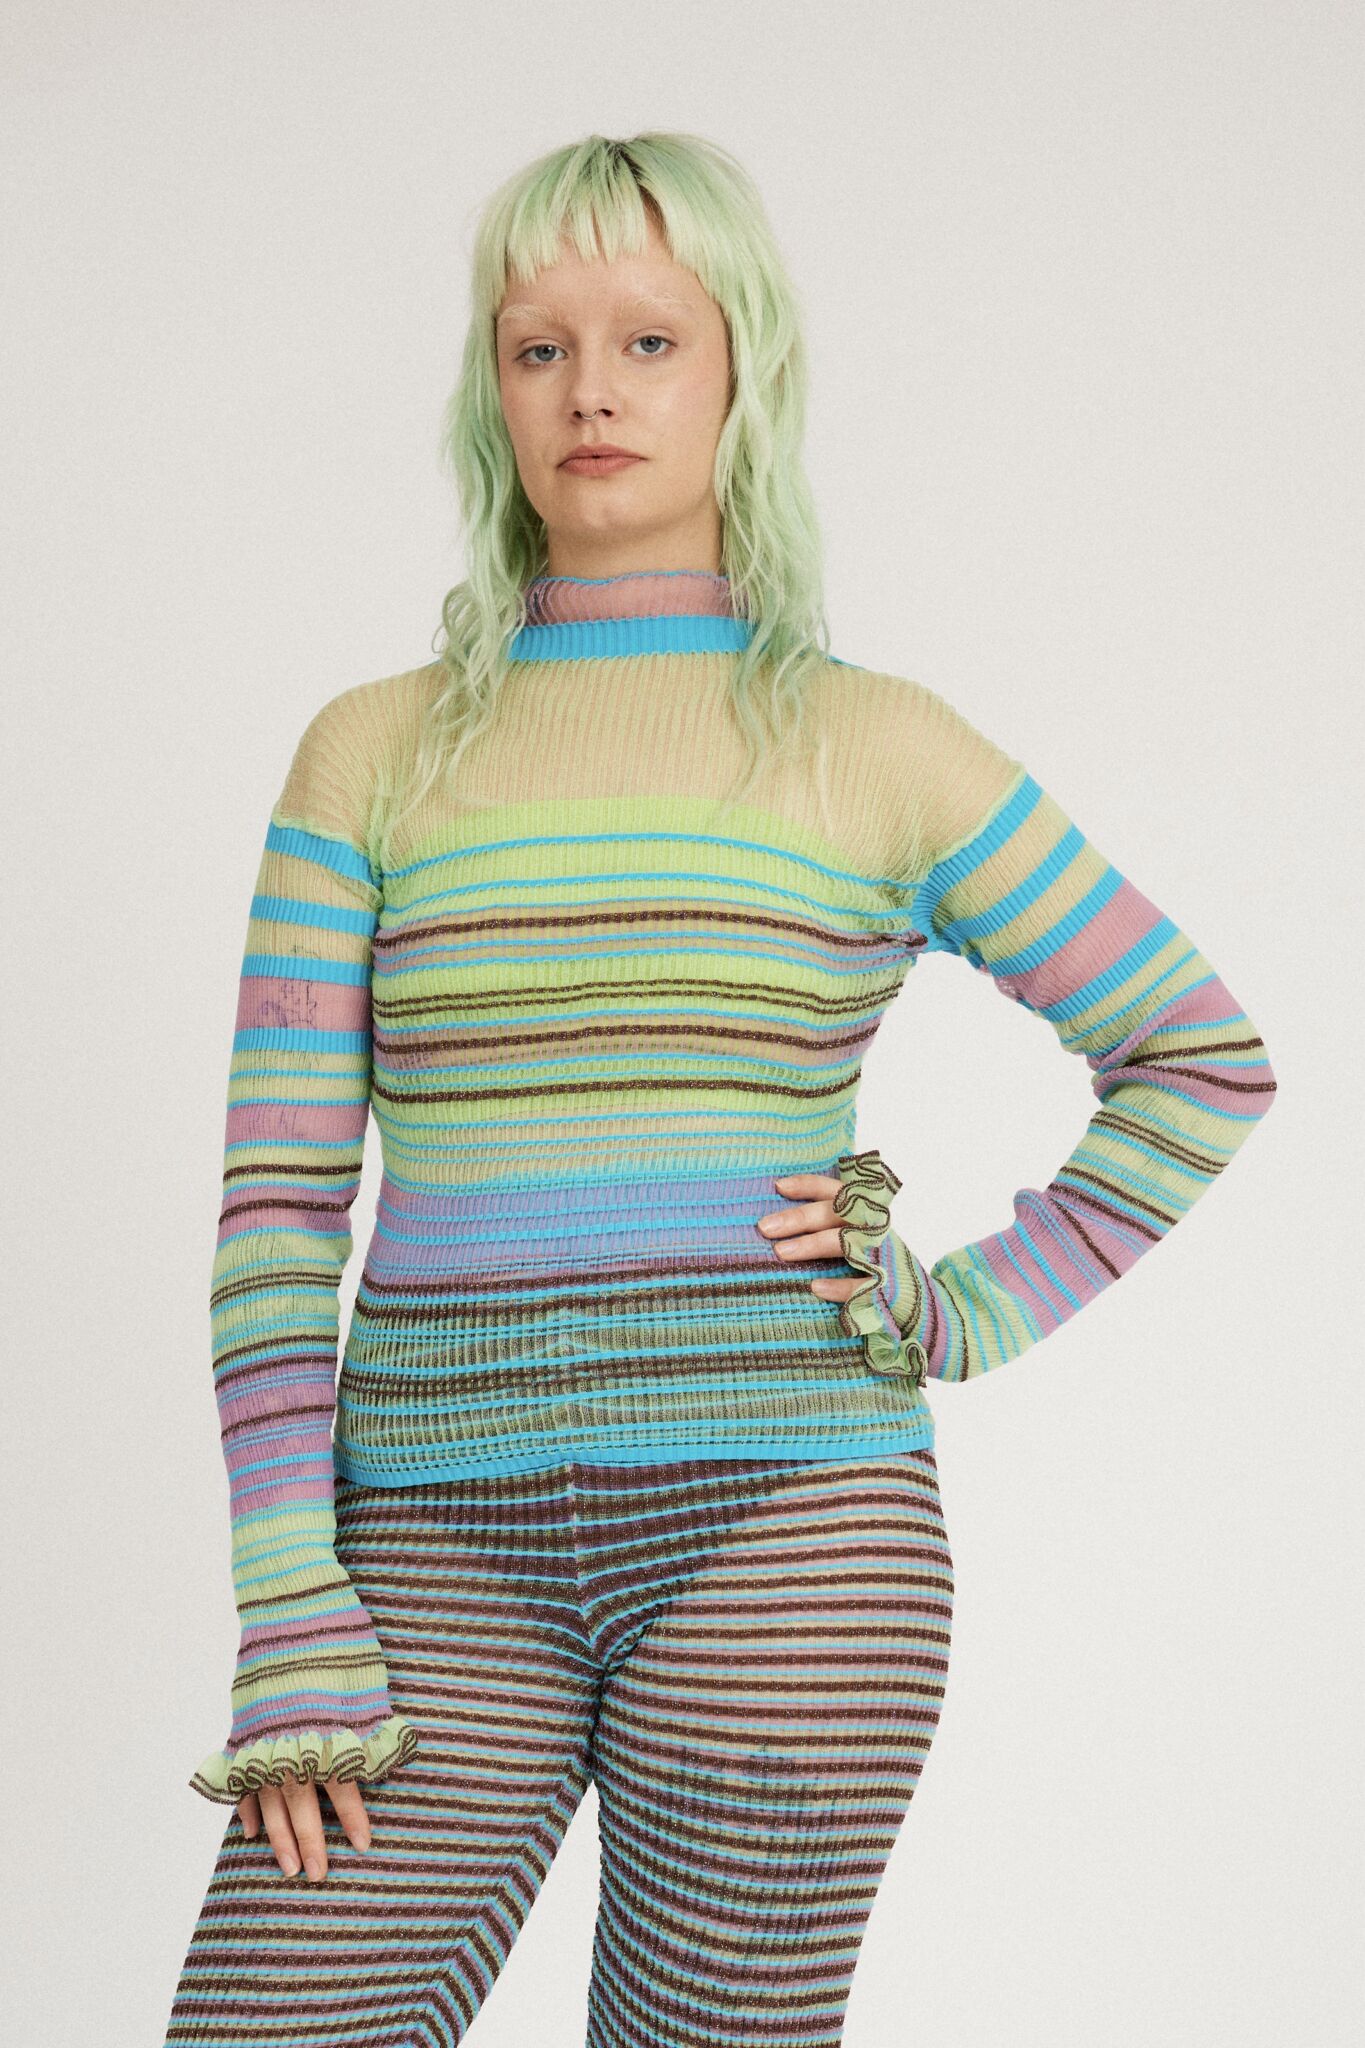 Sweet Secret Jumper in green and turquoise is a knitted transparent high neck jumper in all over bold stripes detailed with shimmery metallized yarn. The textile is lightweight, delicate and very flexible. The jumper has a body fitted silhouette that adapts to the body. Detailed with frills and a logo in the back of the neck.